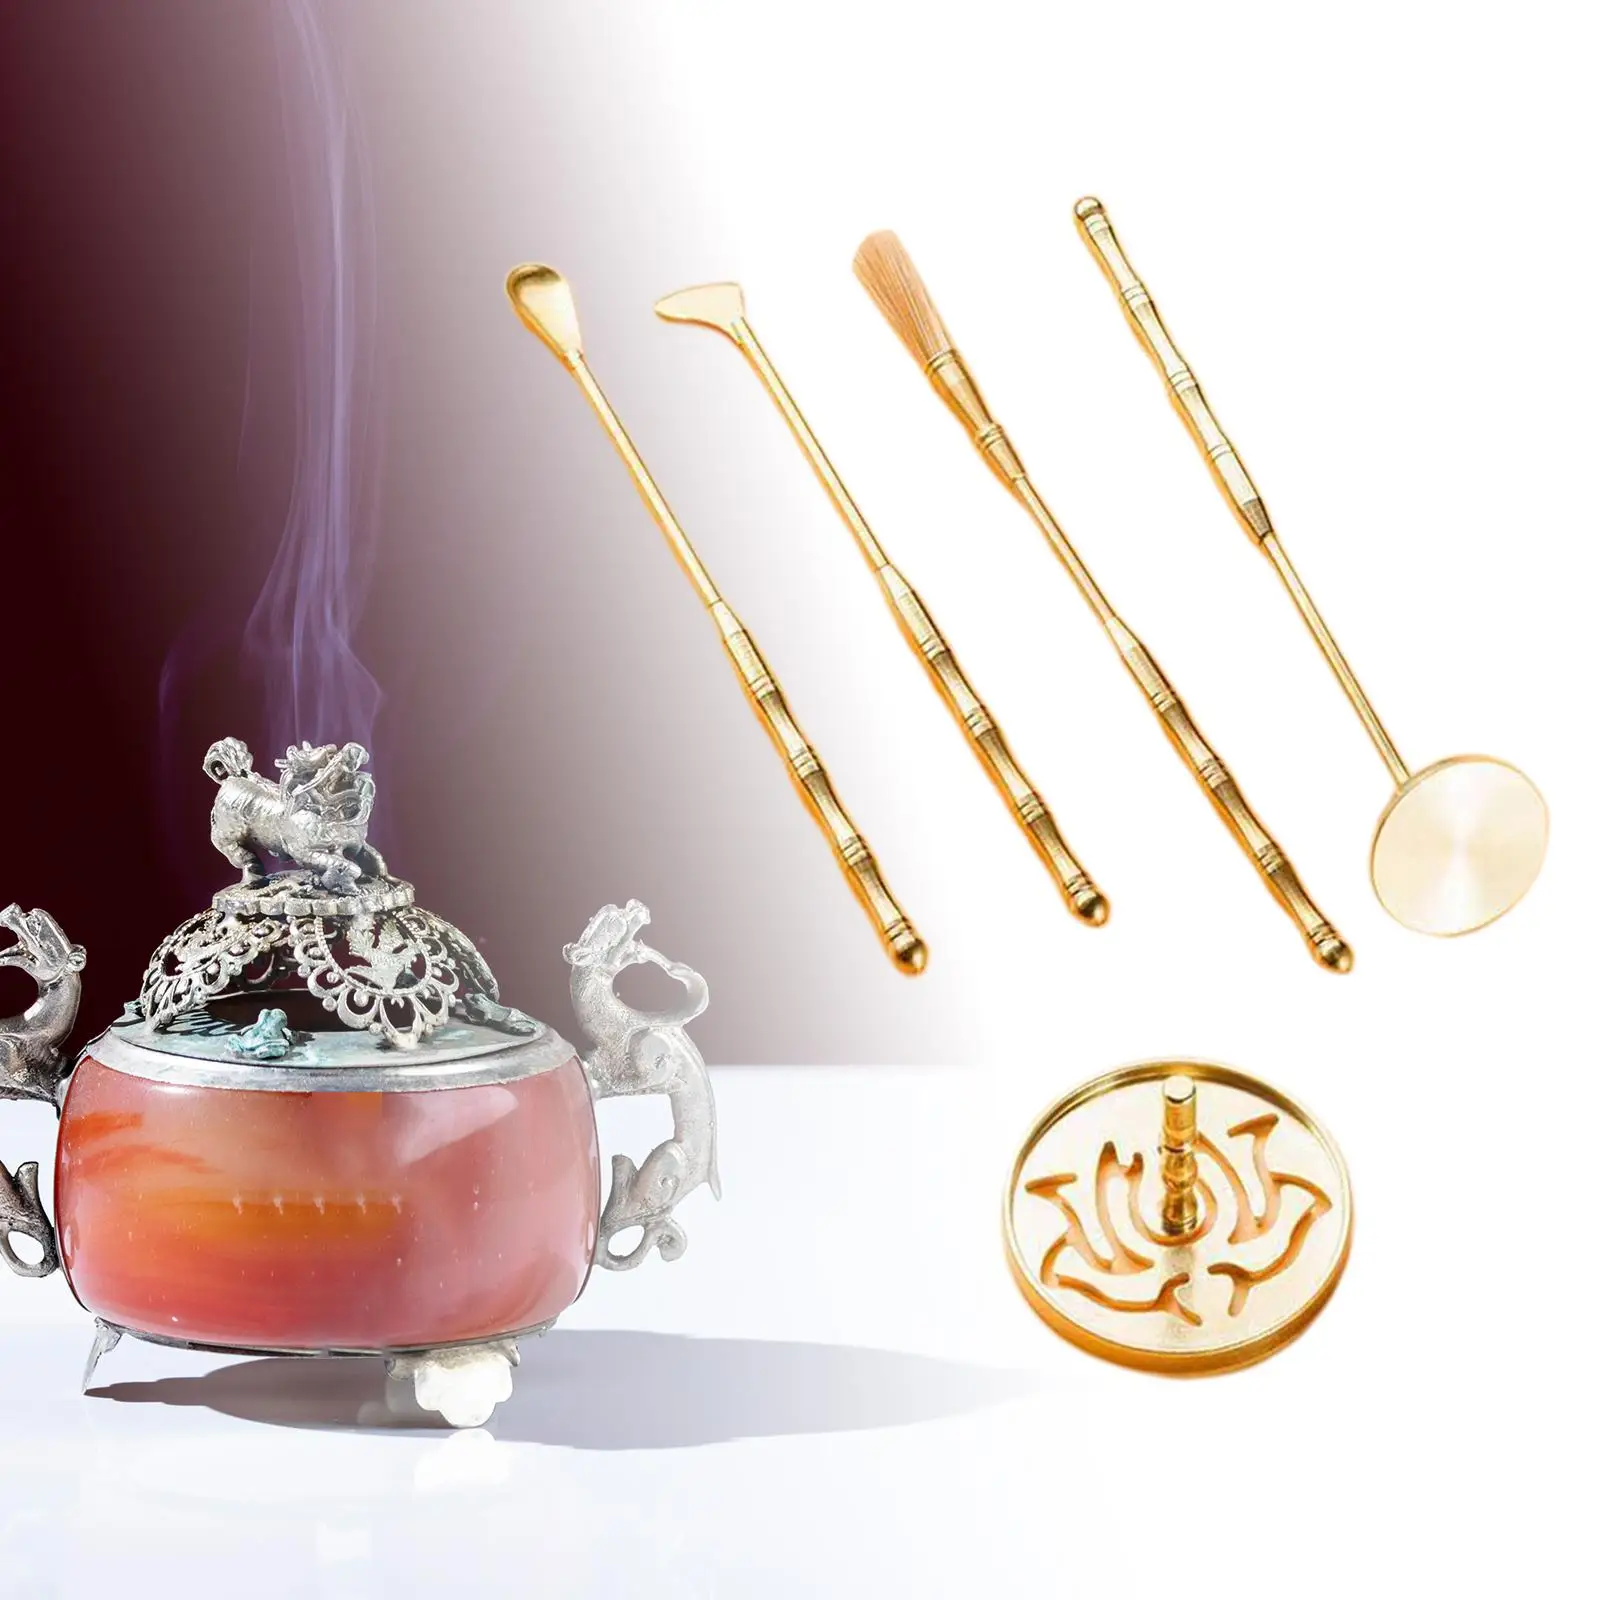 Incense Making Censer Tool Set Incense Brush Incense Spoon Introductory